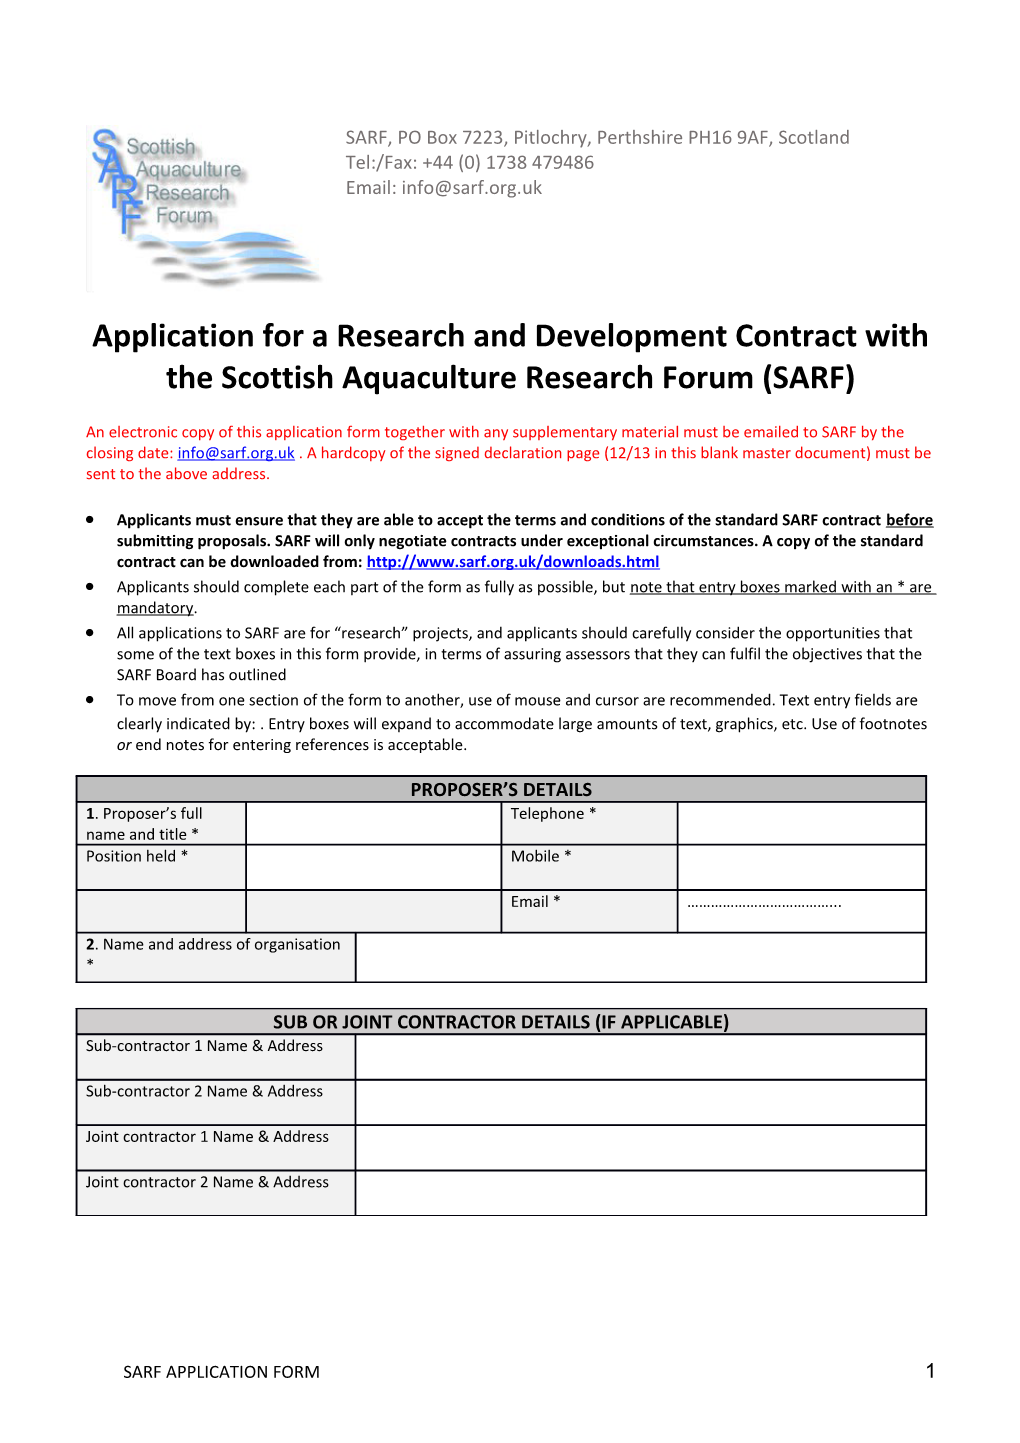 Application for a Research and Development Contract with the Scottish Aquaculture Research